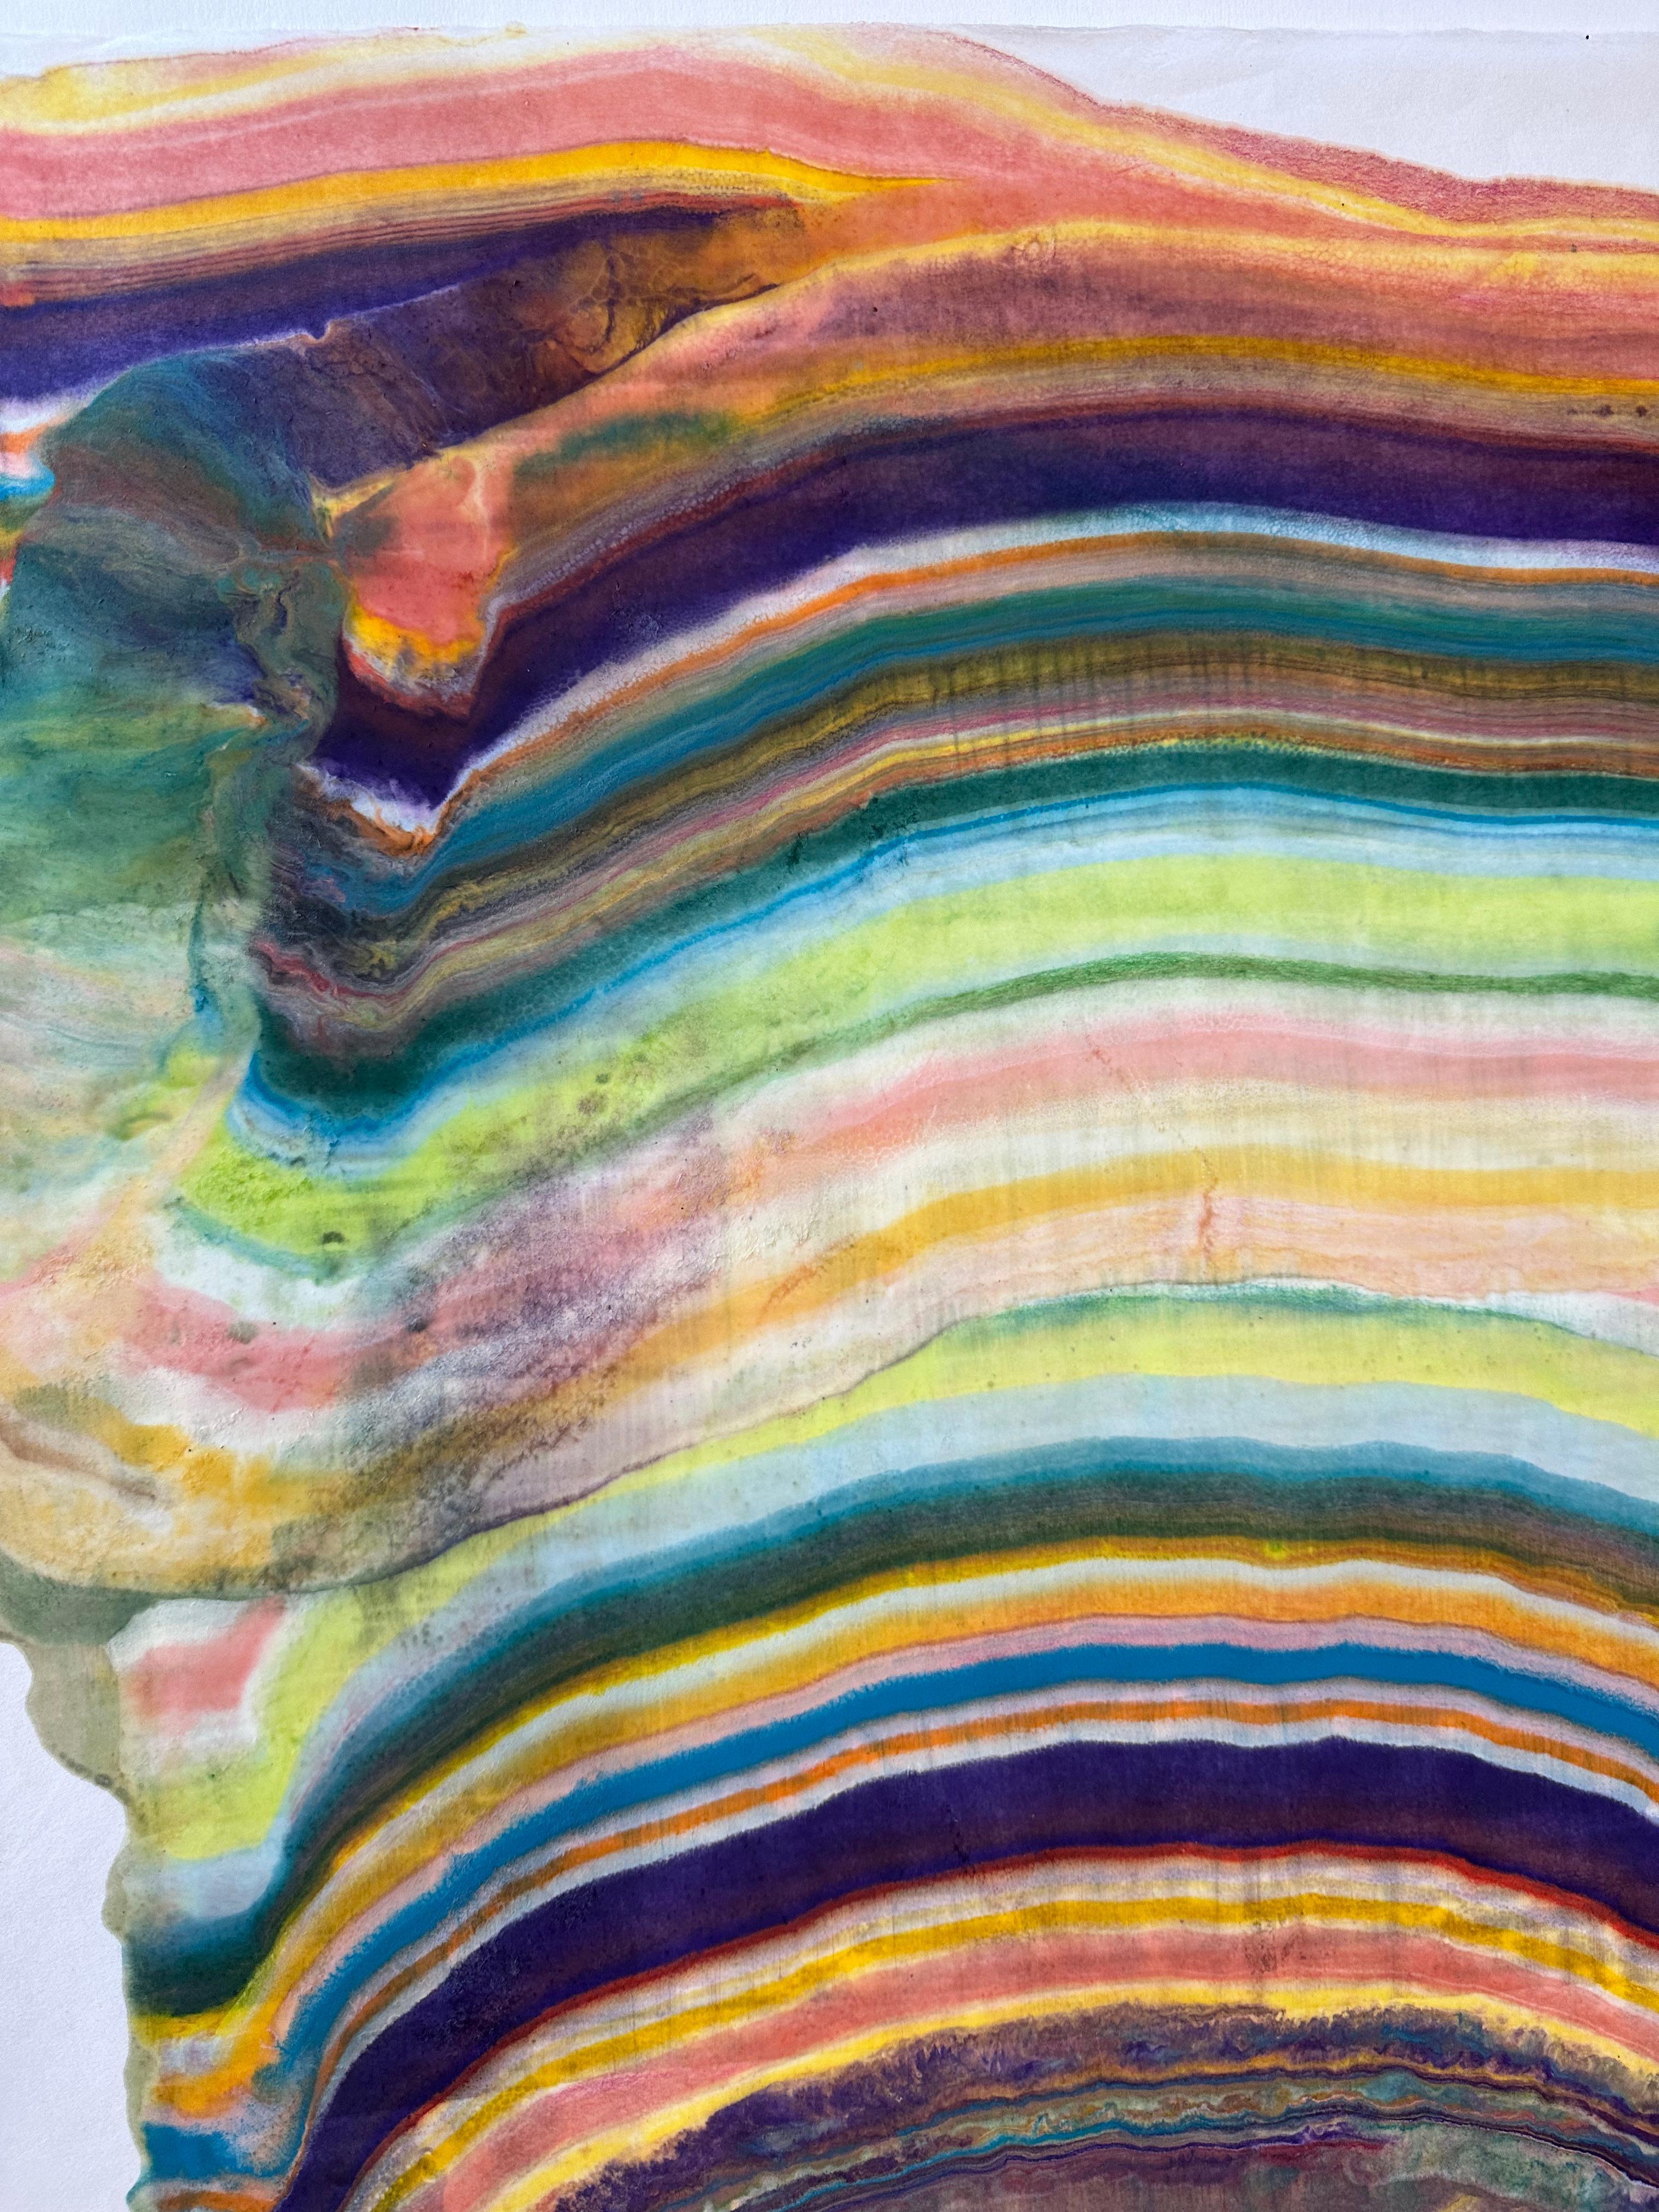 Laura Moriarty's Talking to Rocks 5 is a multicolored encaustic monotype on kozo paper. Layers of pigmented beeswax on lightweight paper create an undulating composition suggesting layers of the earth's crust and geological formations in bright